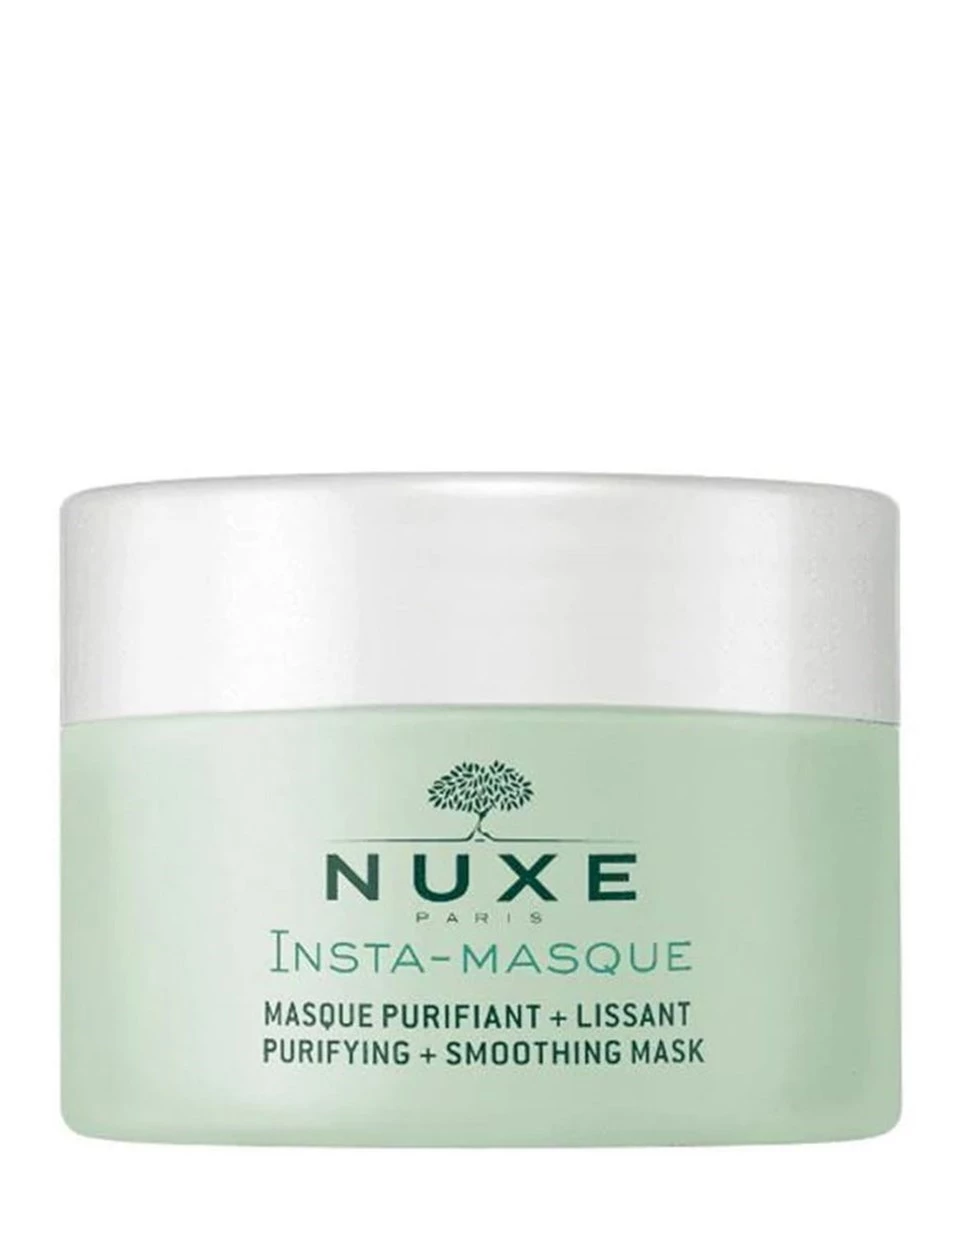 Nuxe Masque Purifiant+Lissant Insta Masque 50